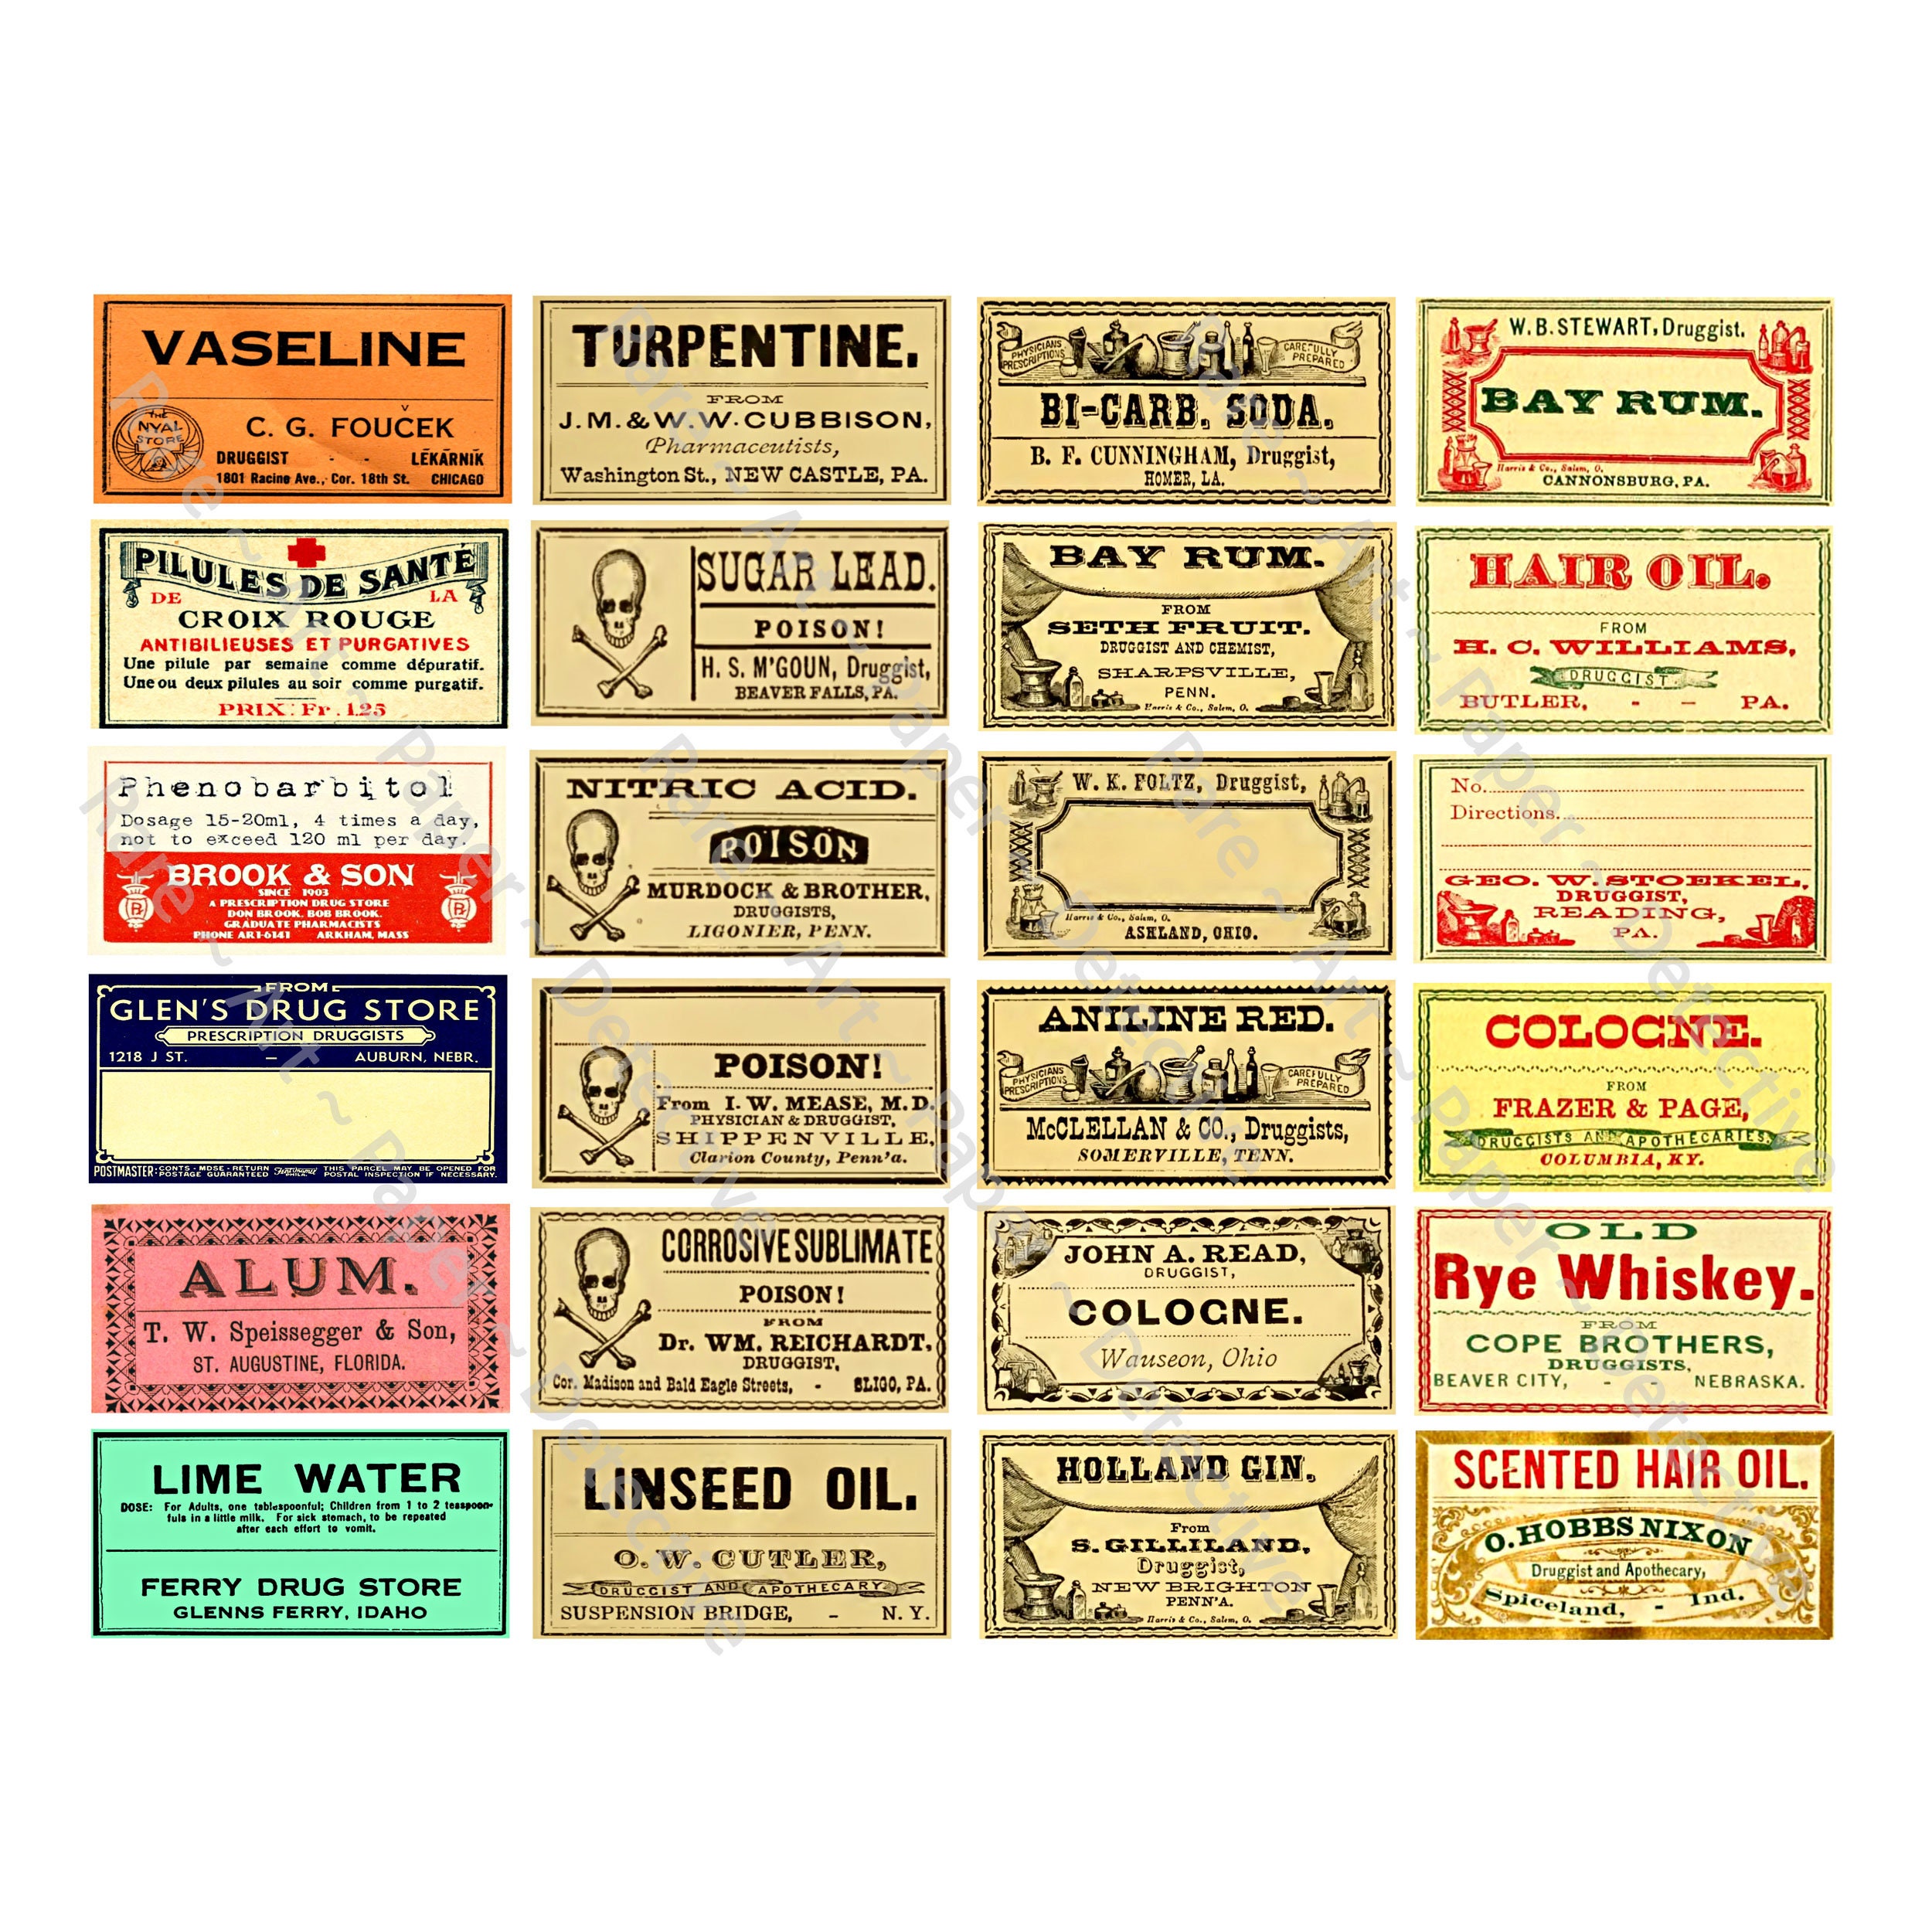 Pin on Apothecary Stickers, Druggist Labels, Pharmacy, Chemist